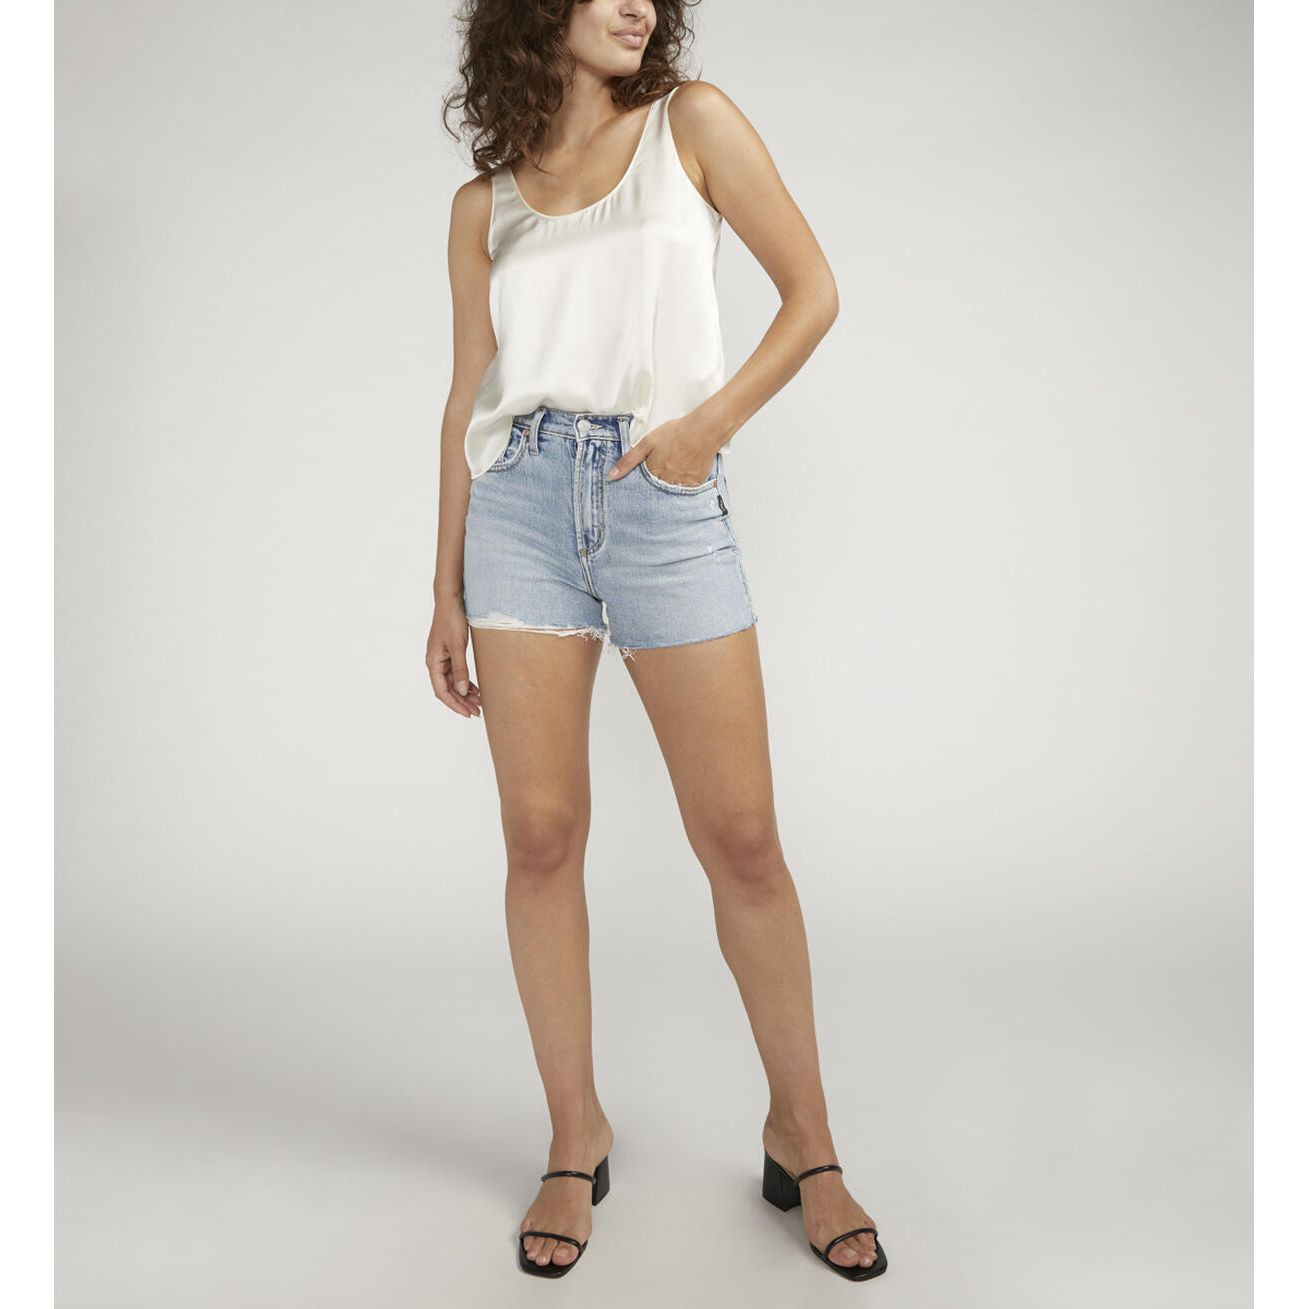 Silver Jeans - Highly Desirable Jean Shorts in L28519RCS219